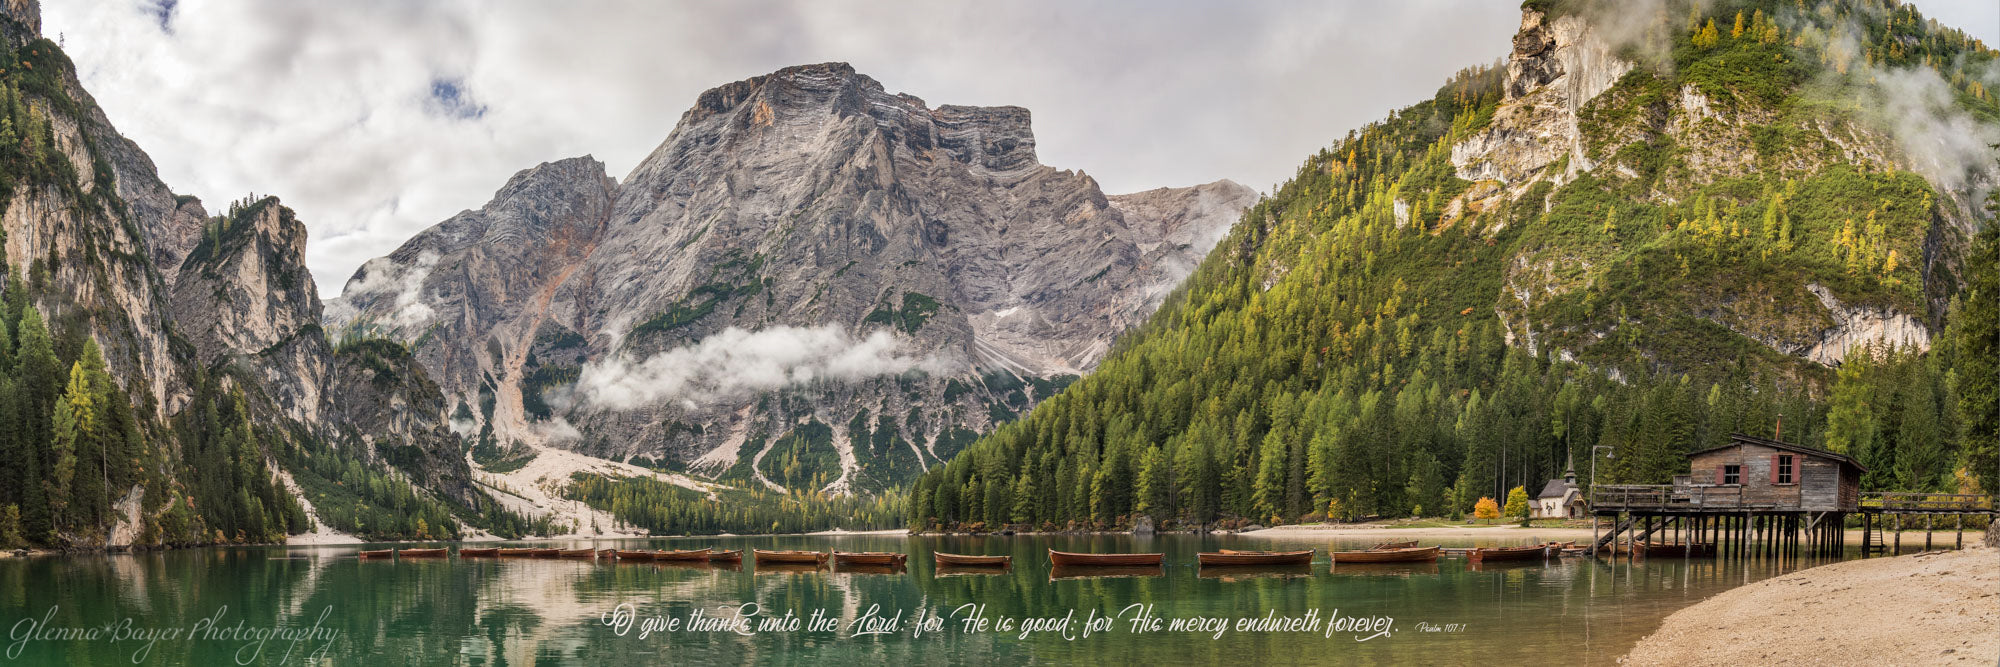 Panorama of canoes lined across Lake Braise in Dolomites, Italy with scripture verse